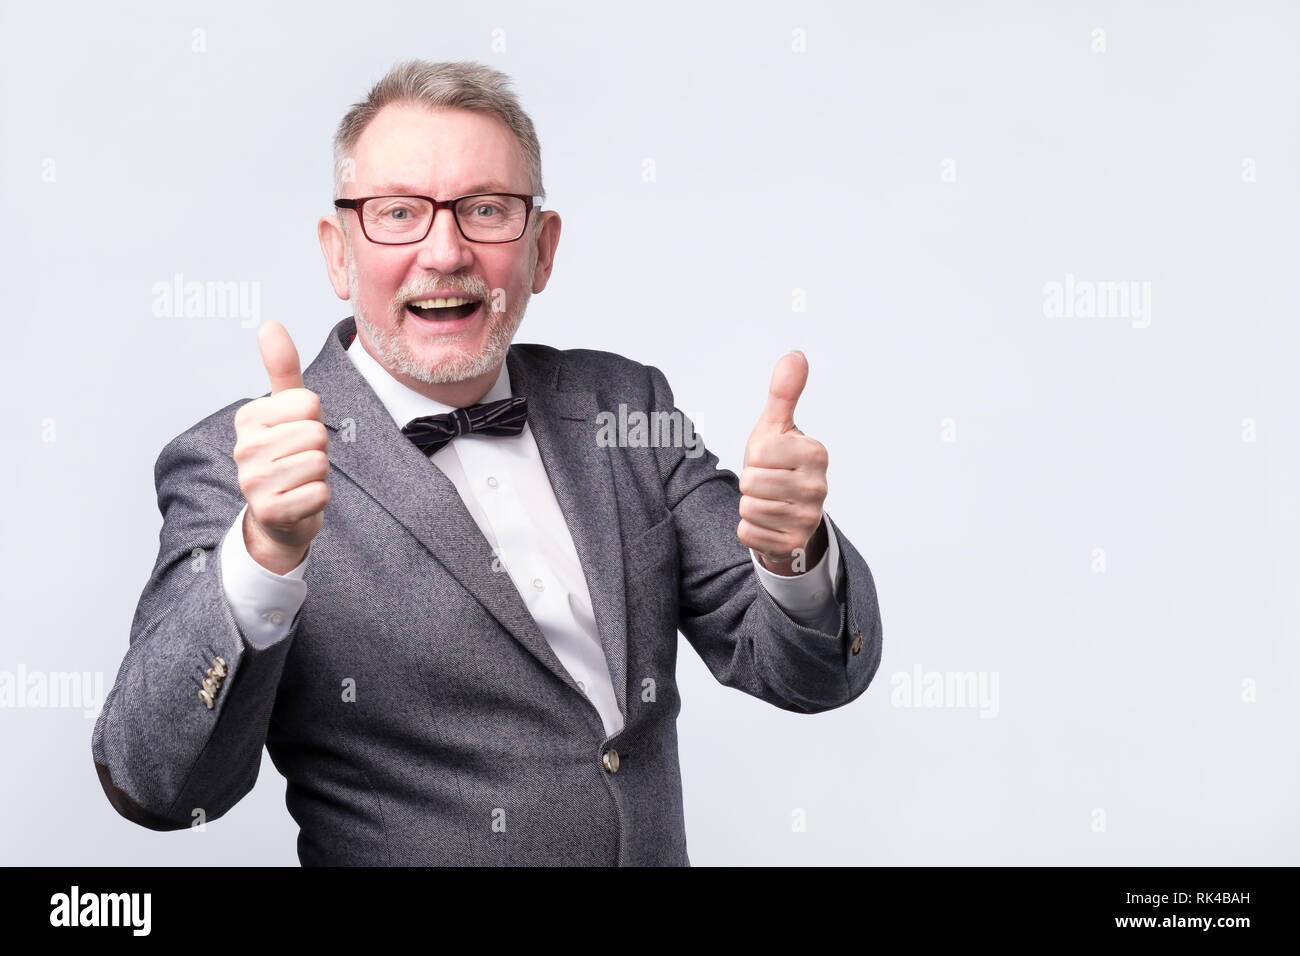 senior business man with bow tie showing thumbs up Stock Photo